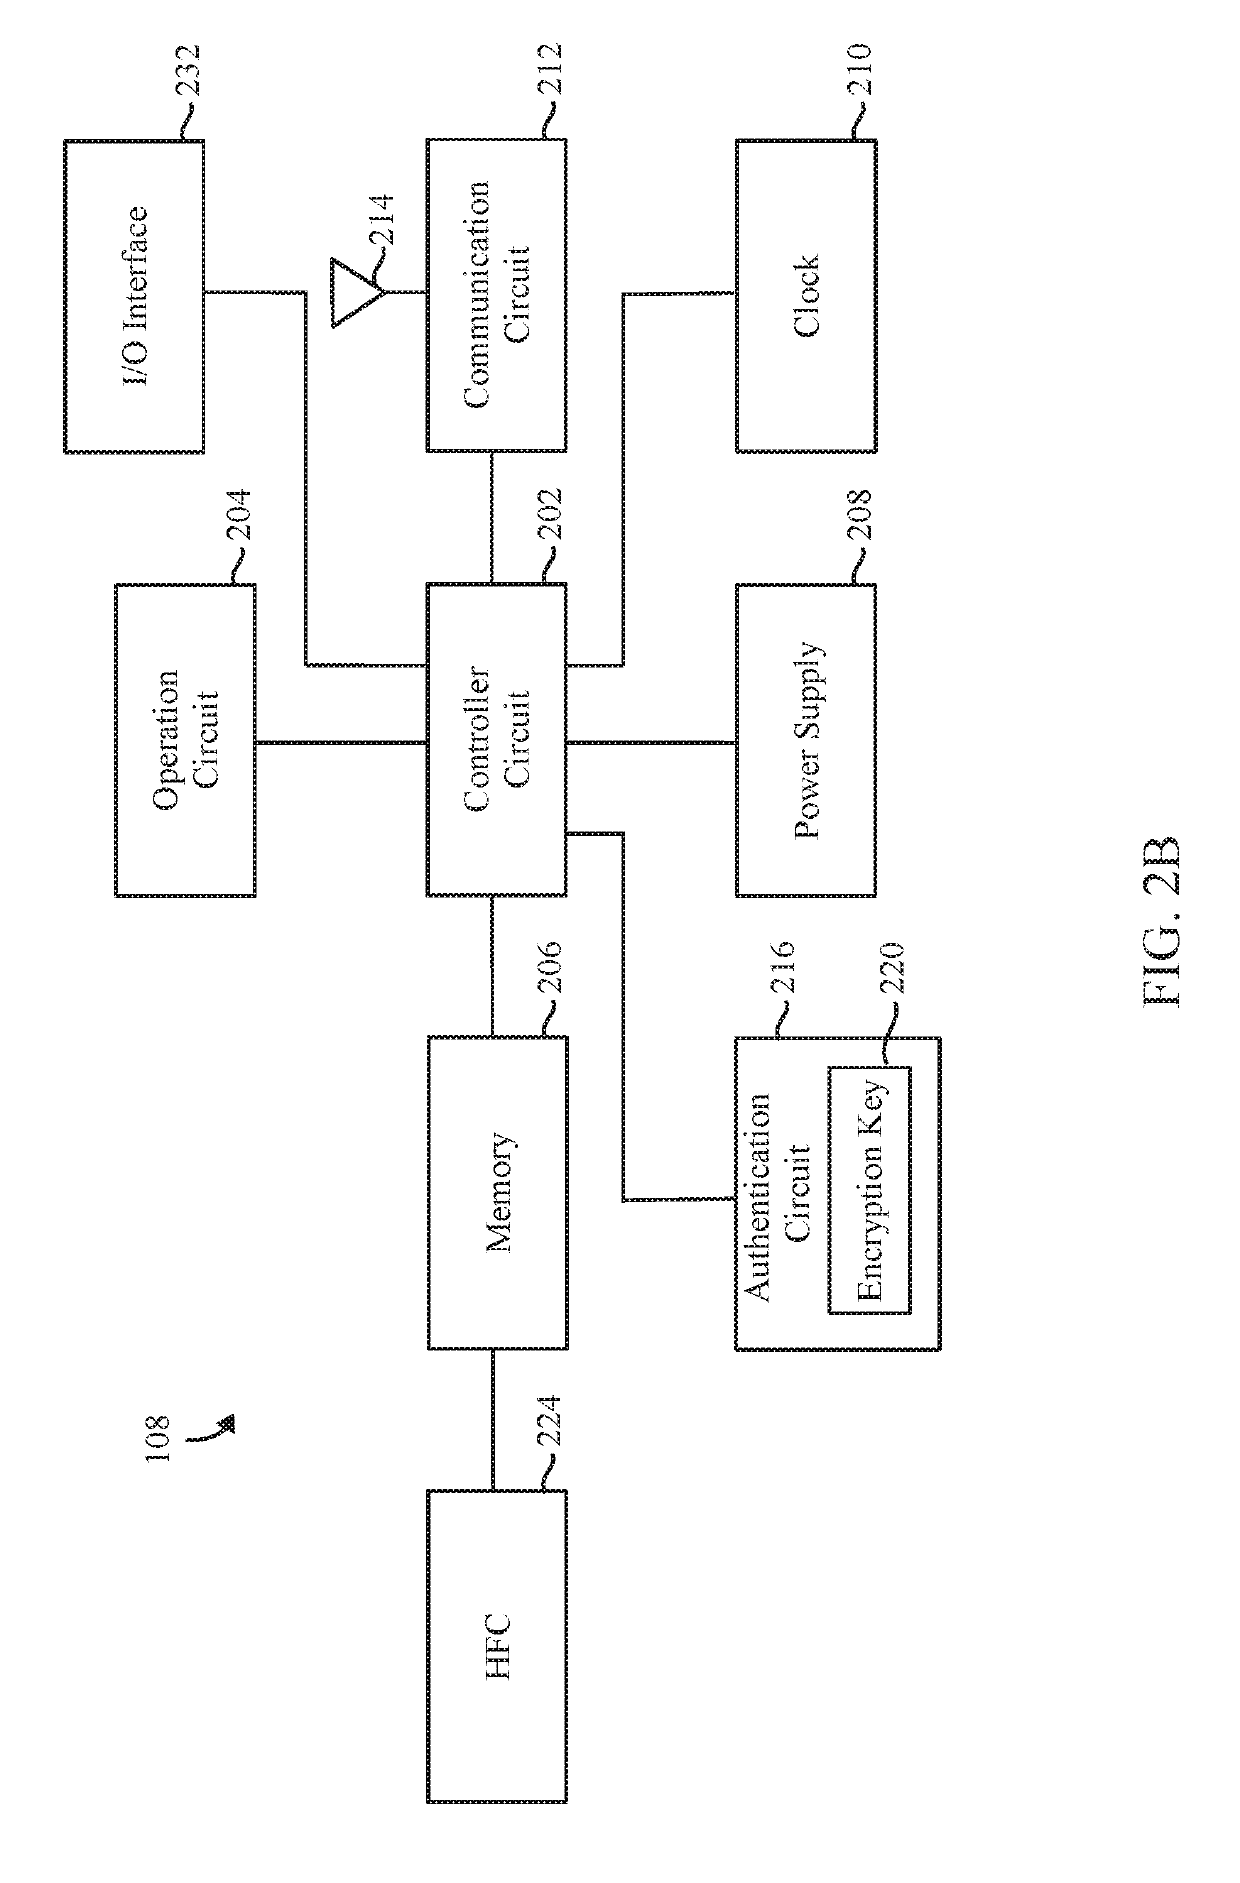 Method for authenticating devices in a medical network